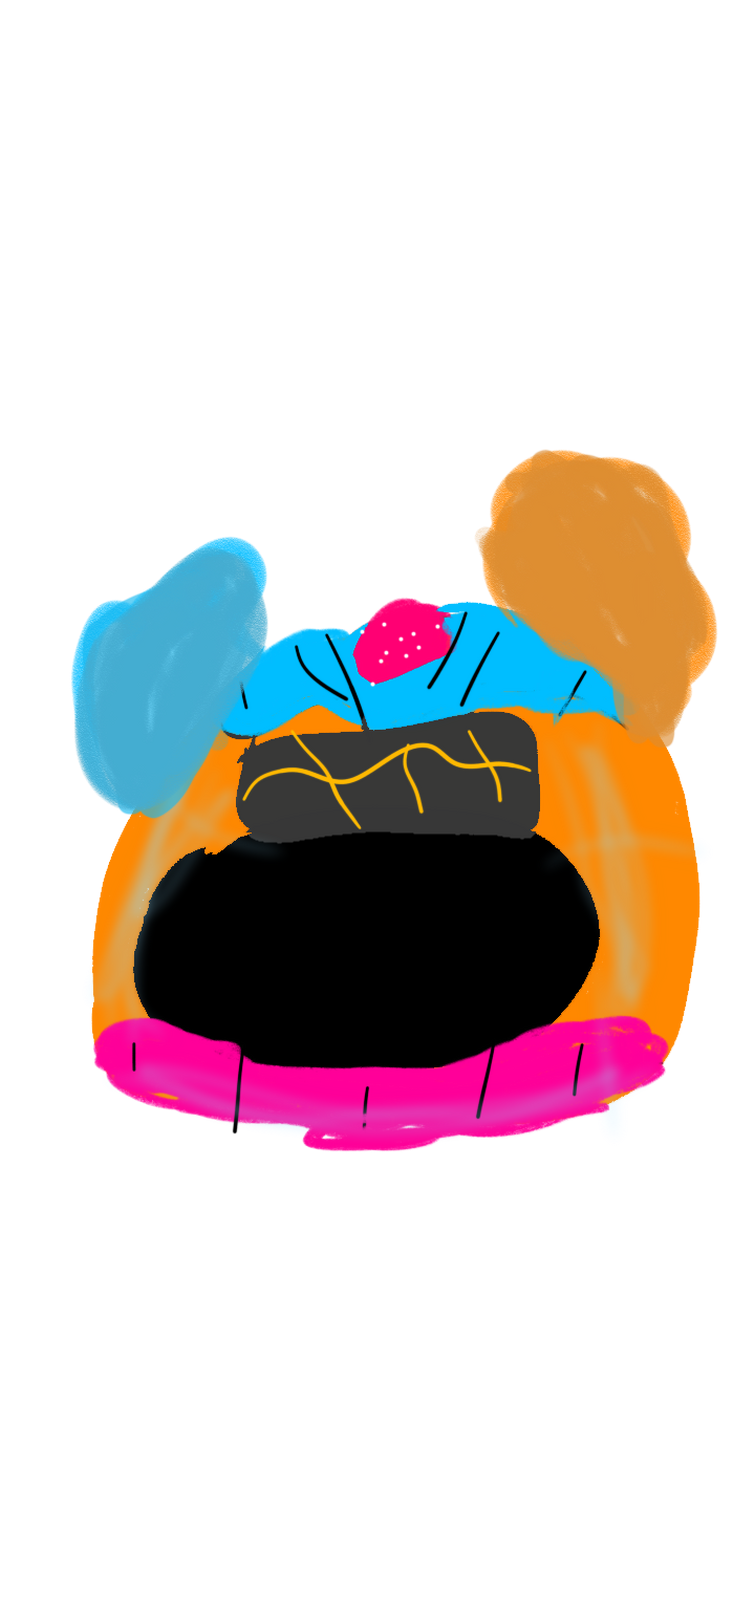 Just A Fire Haven Epic Wubbox I Made by RentSt on Sketchers United